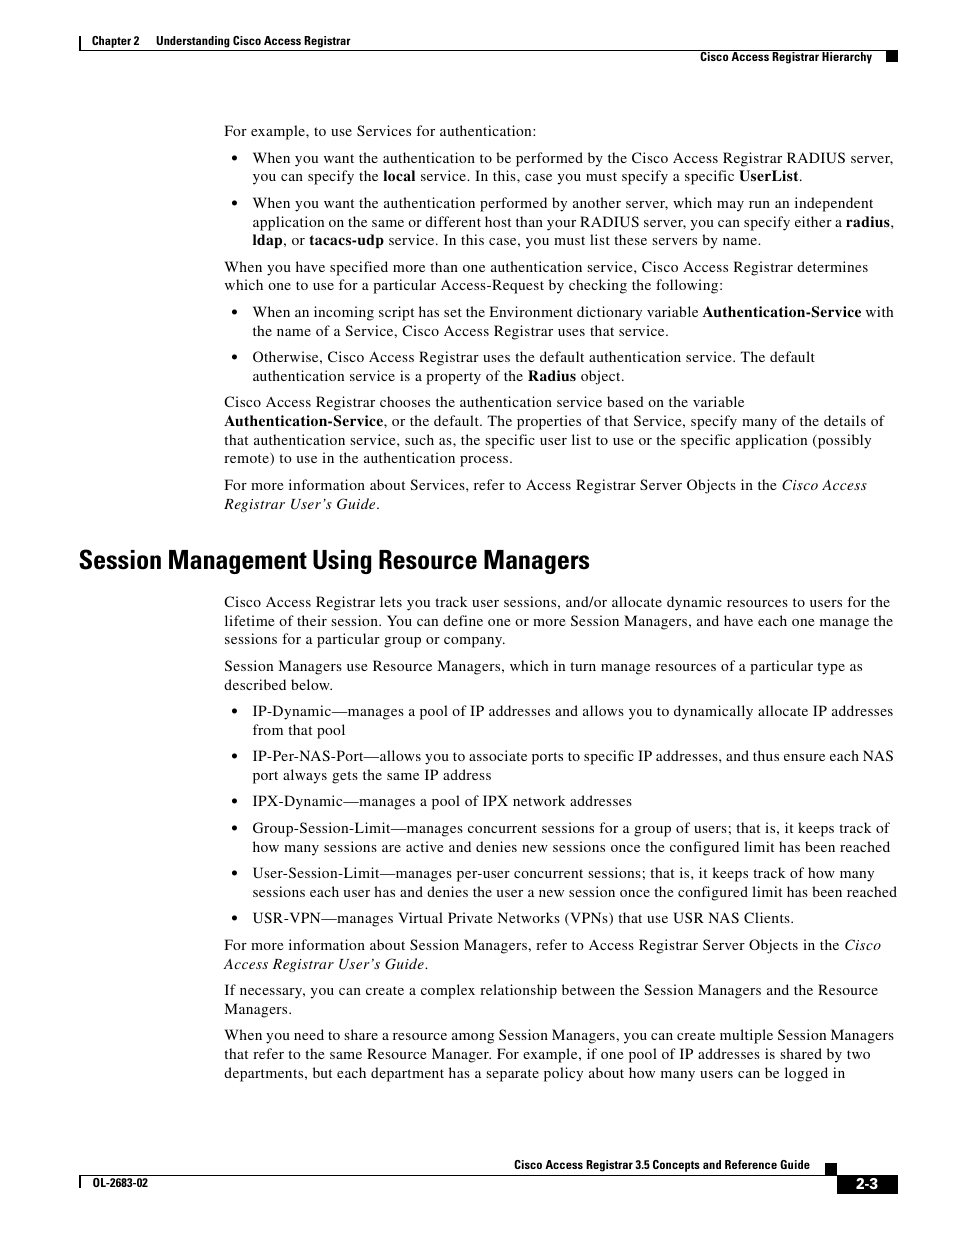 Session management using resource managers | Cisco Cisco Access Registrar 3.5 User Manual | Page 21 / 80